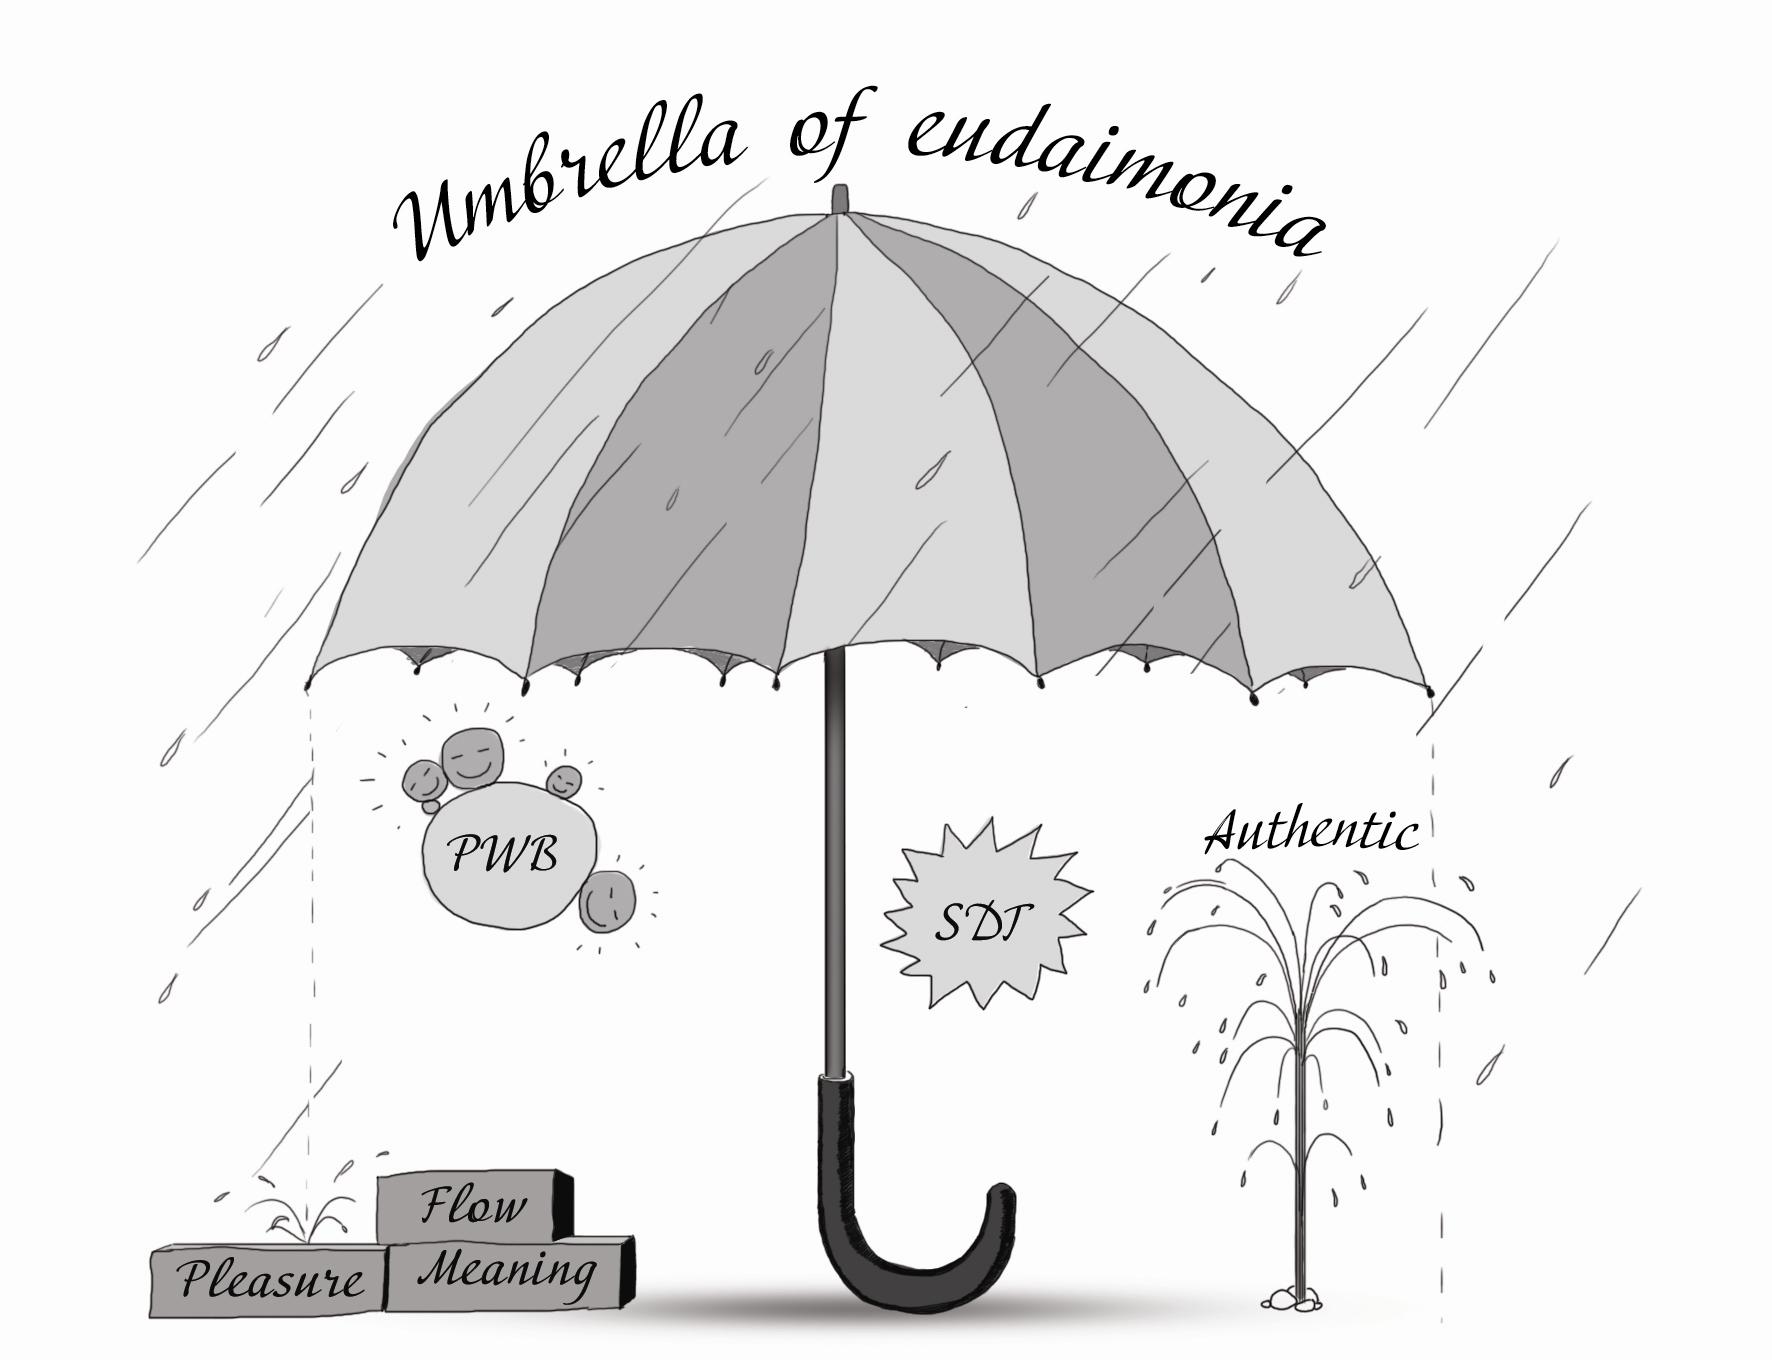 Theories of Well-Being: What Else Lives Under the Umbrella of Eudaimonia?